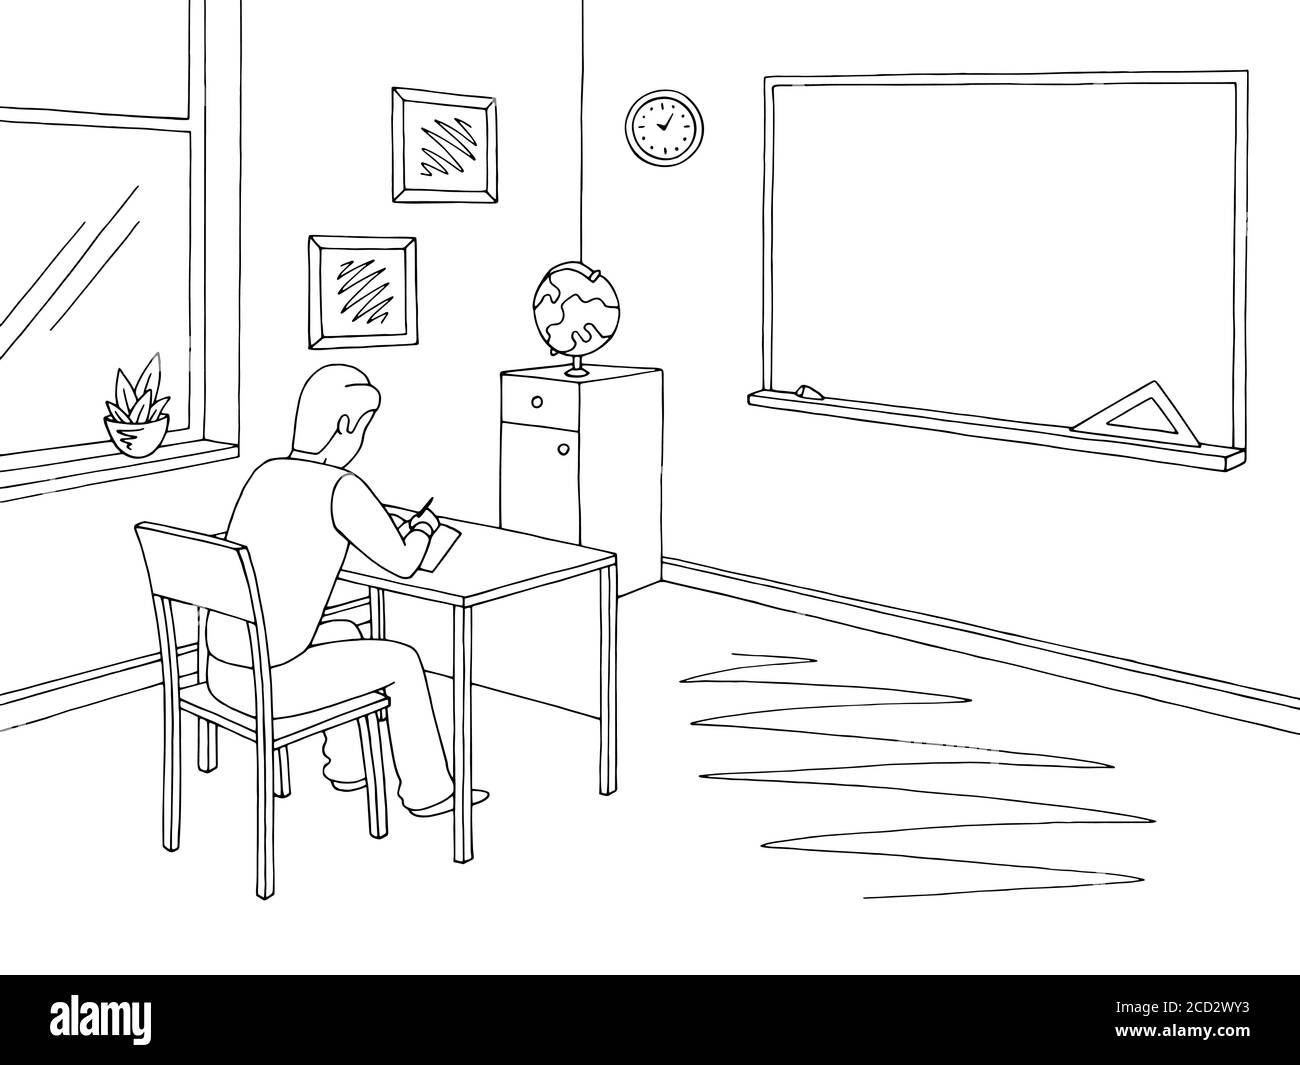 Classroom graphic black white school interior sketch illustration vector. Boy writing in a notebook at the lesson Stock Vector